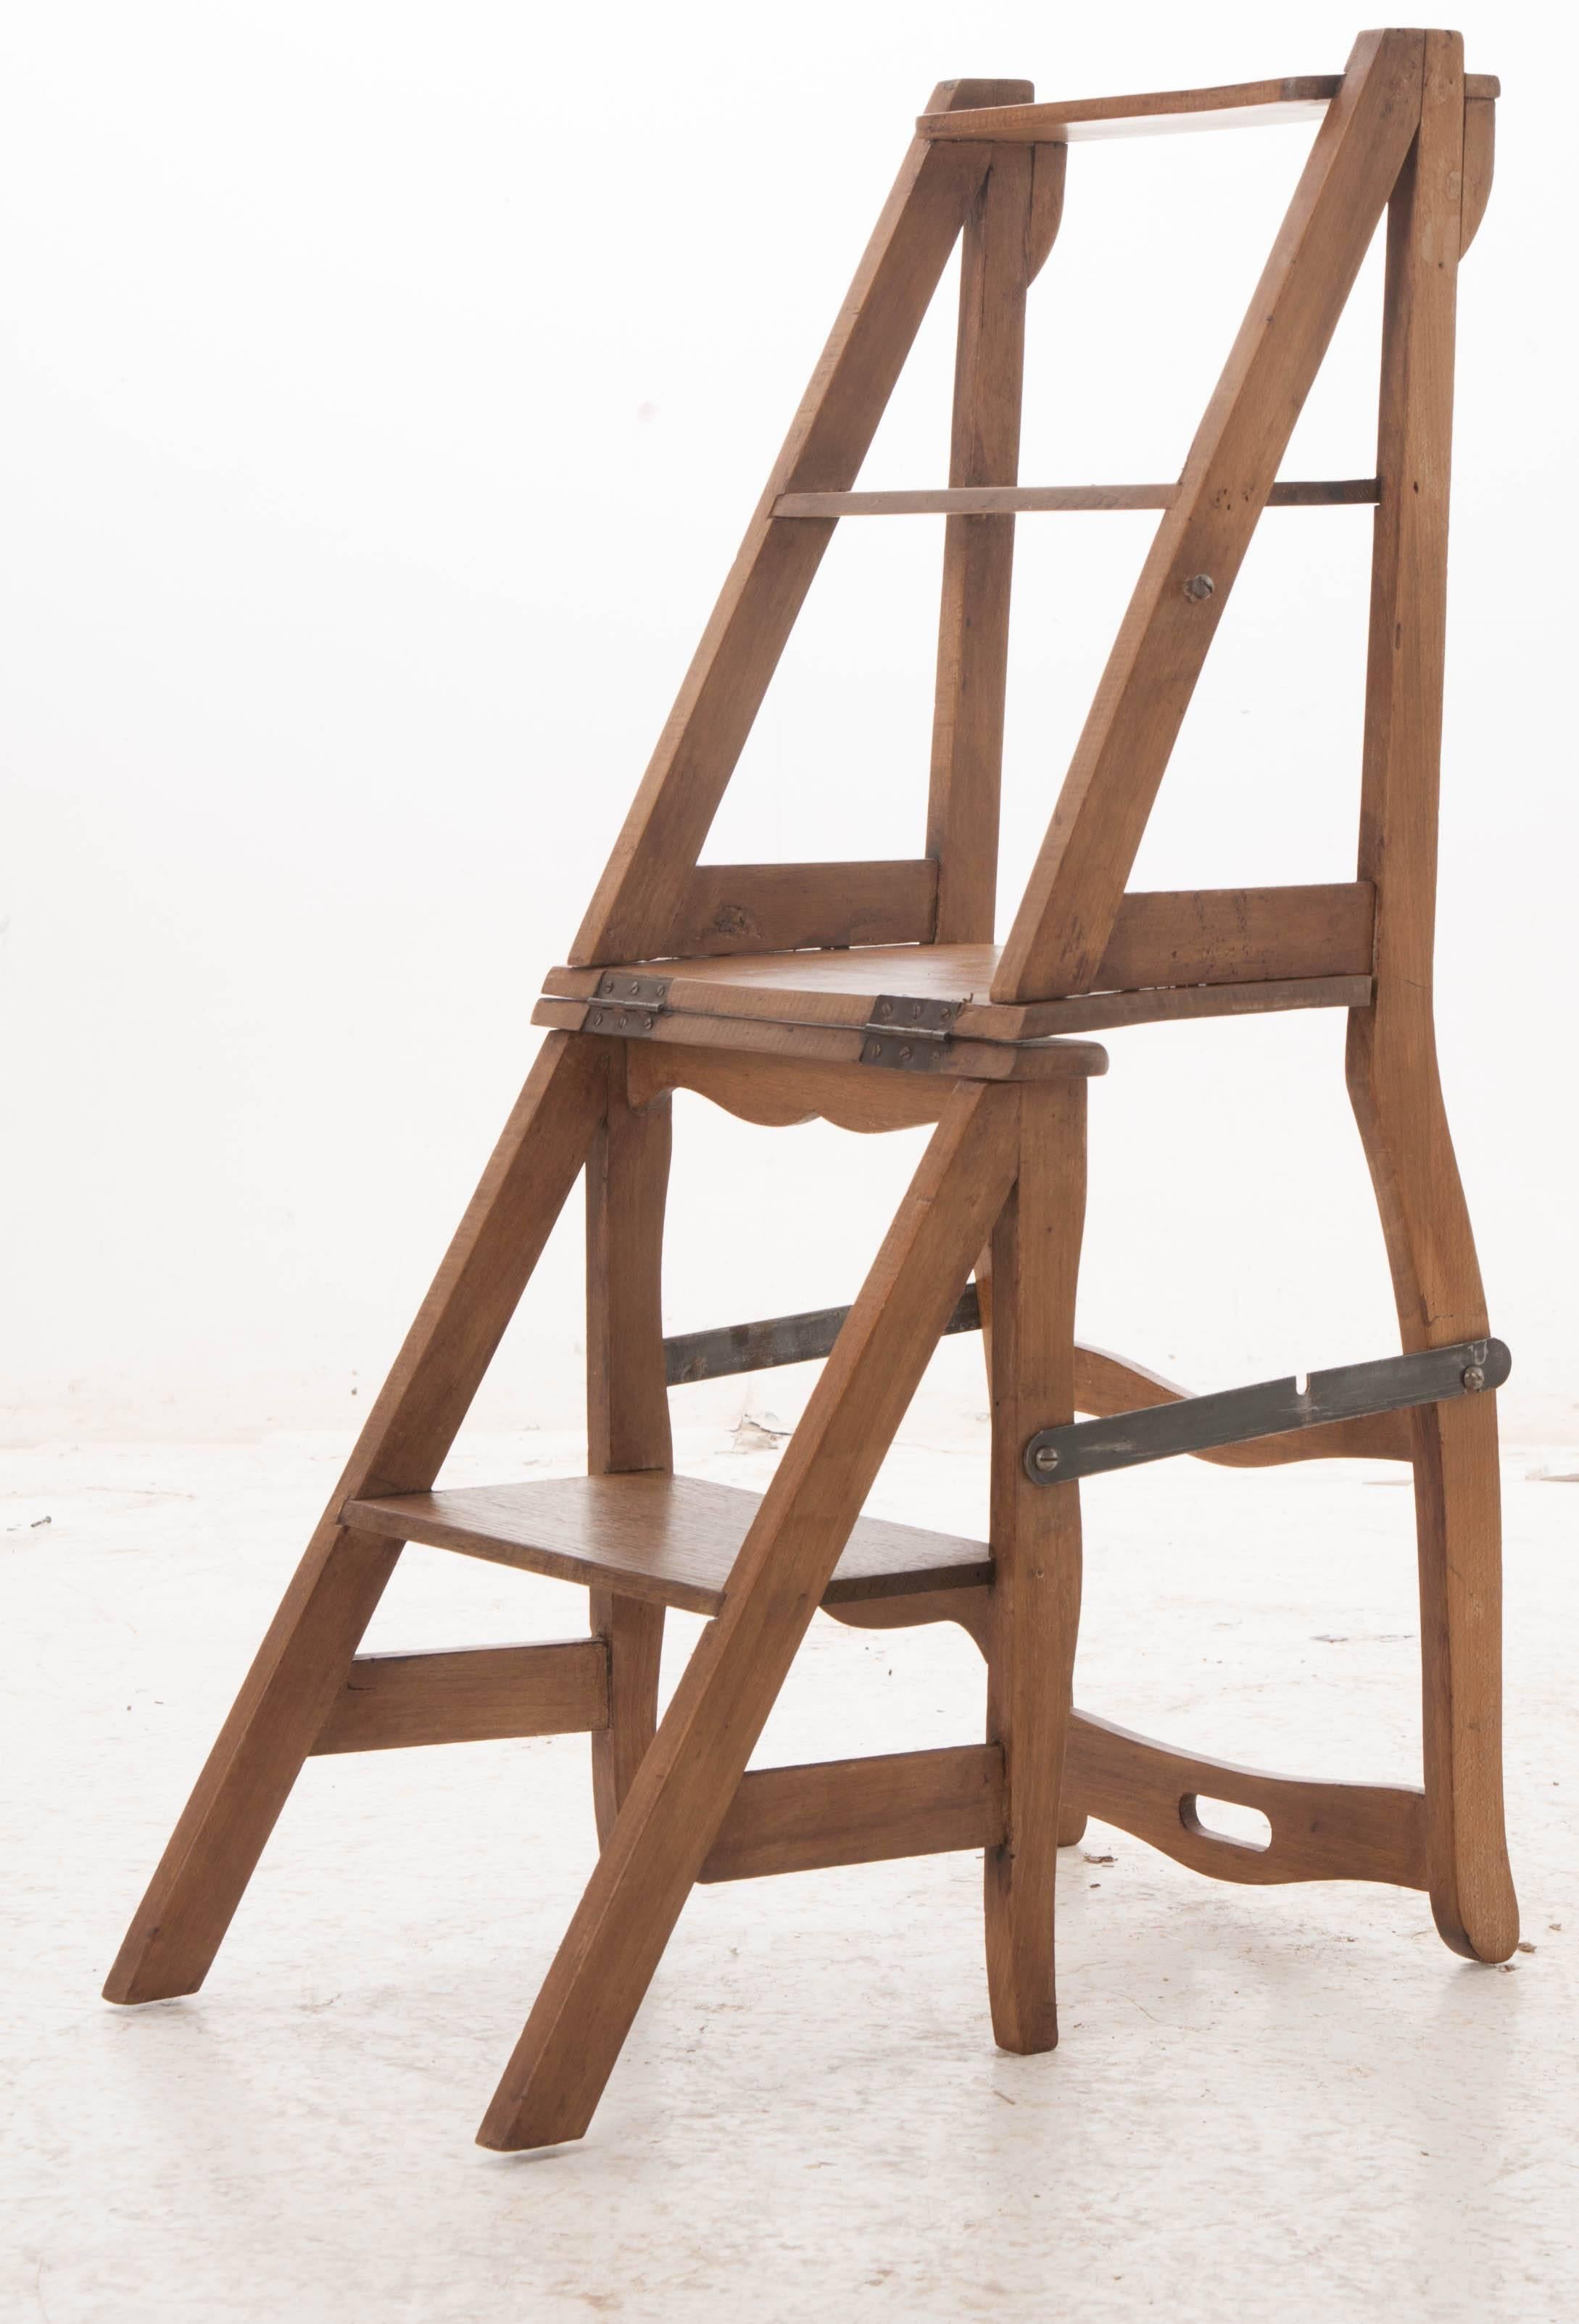 Ingeniously designed, this French oak piece doubles as both a step ladder and a chair. It can be easily configured to fulfill whichever use you have for it. Every inch hides some inconspicuous design element that enables the transformation from